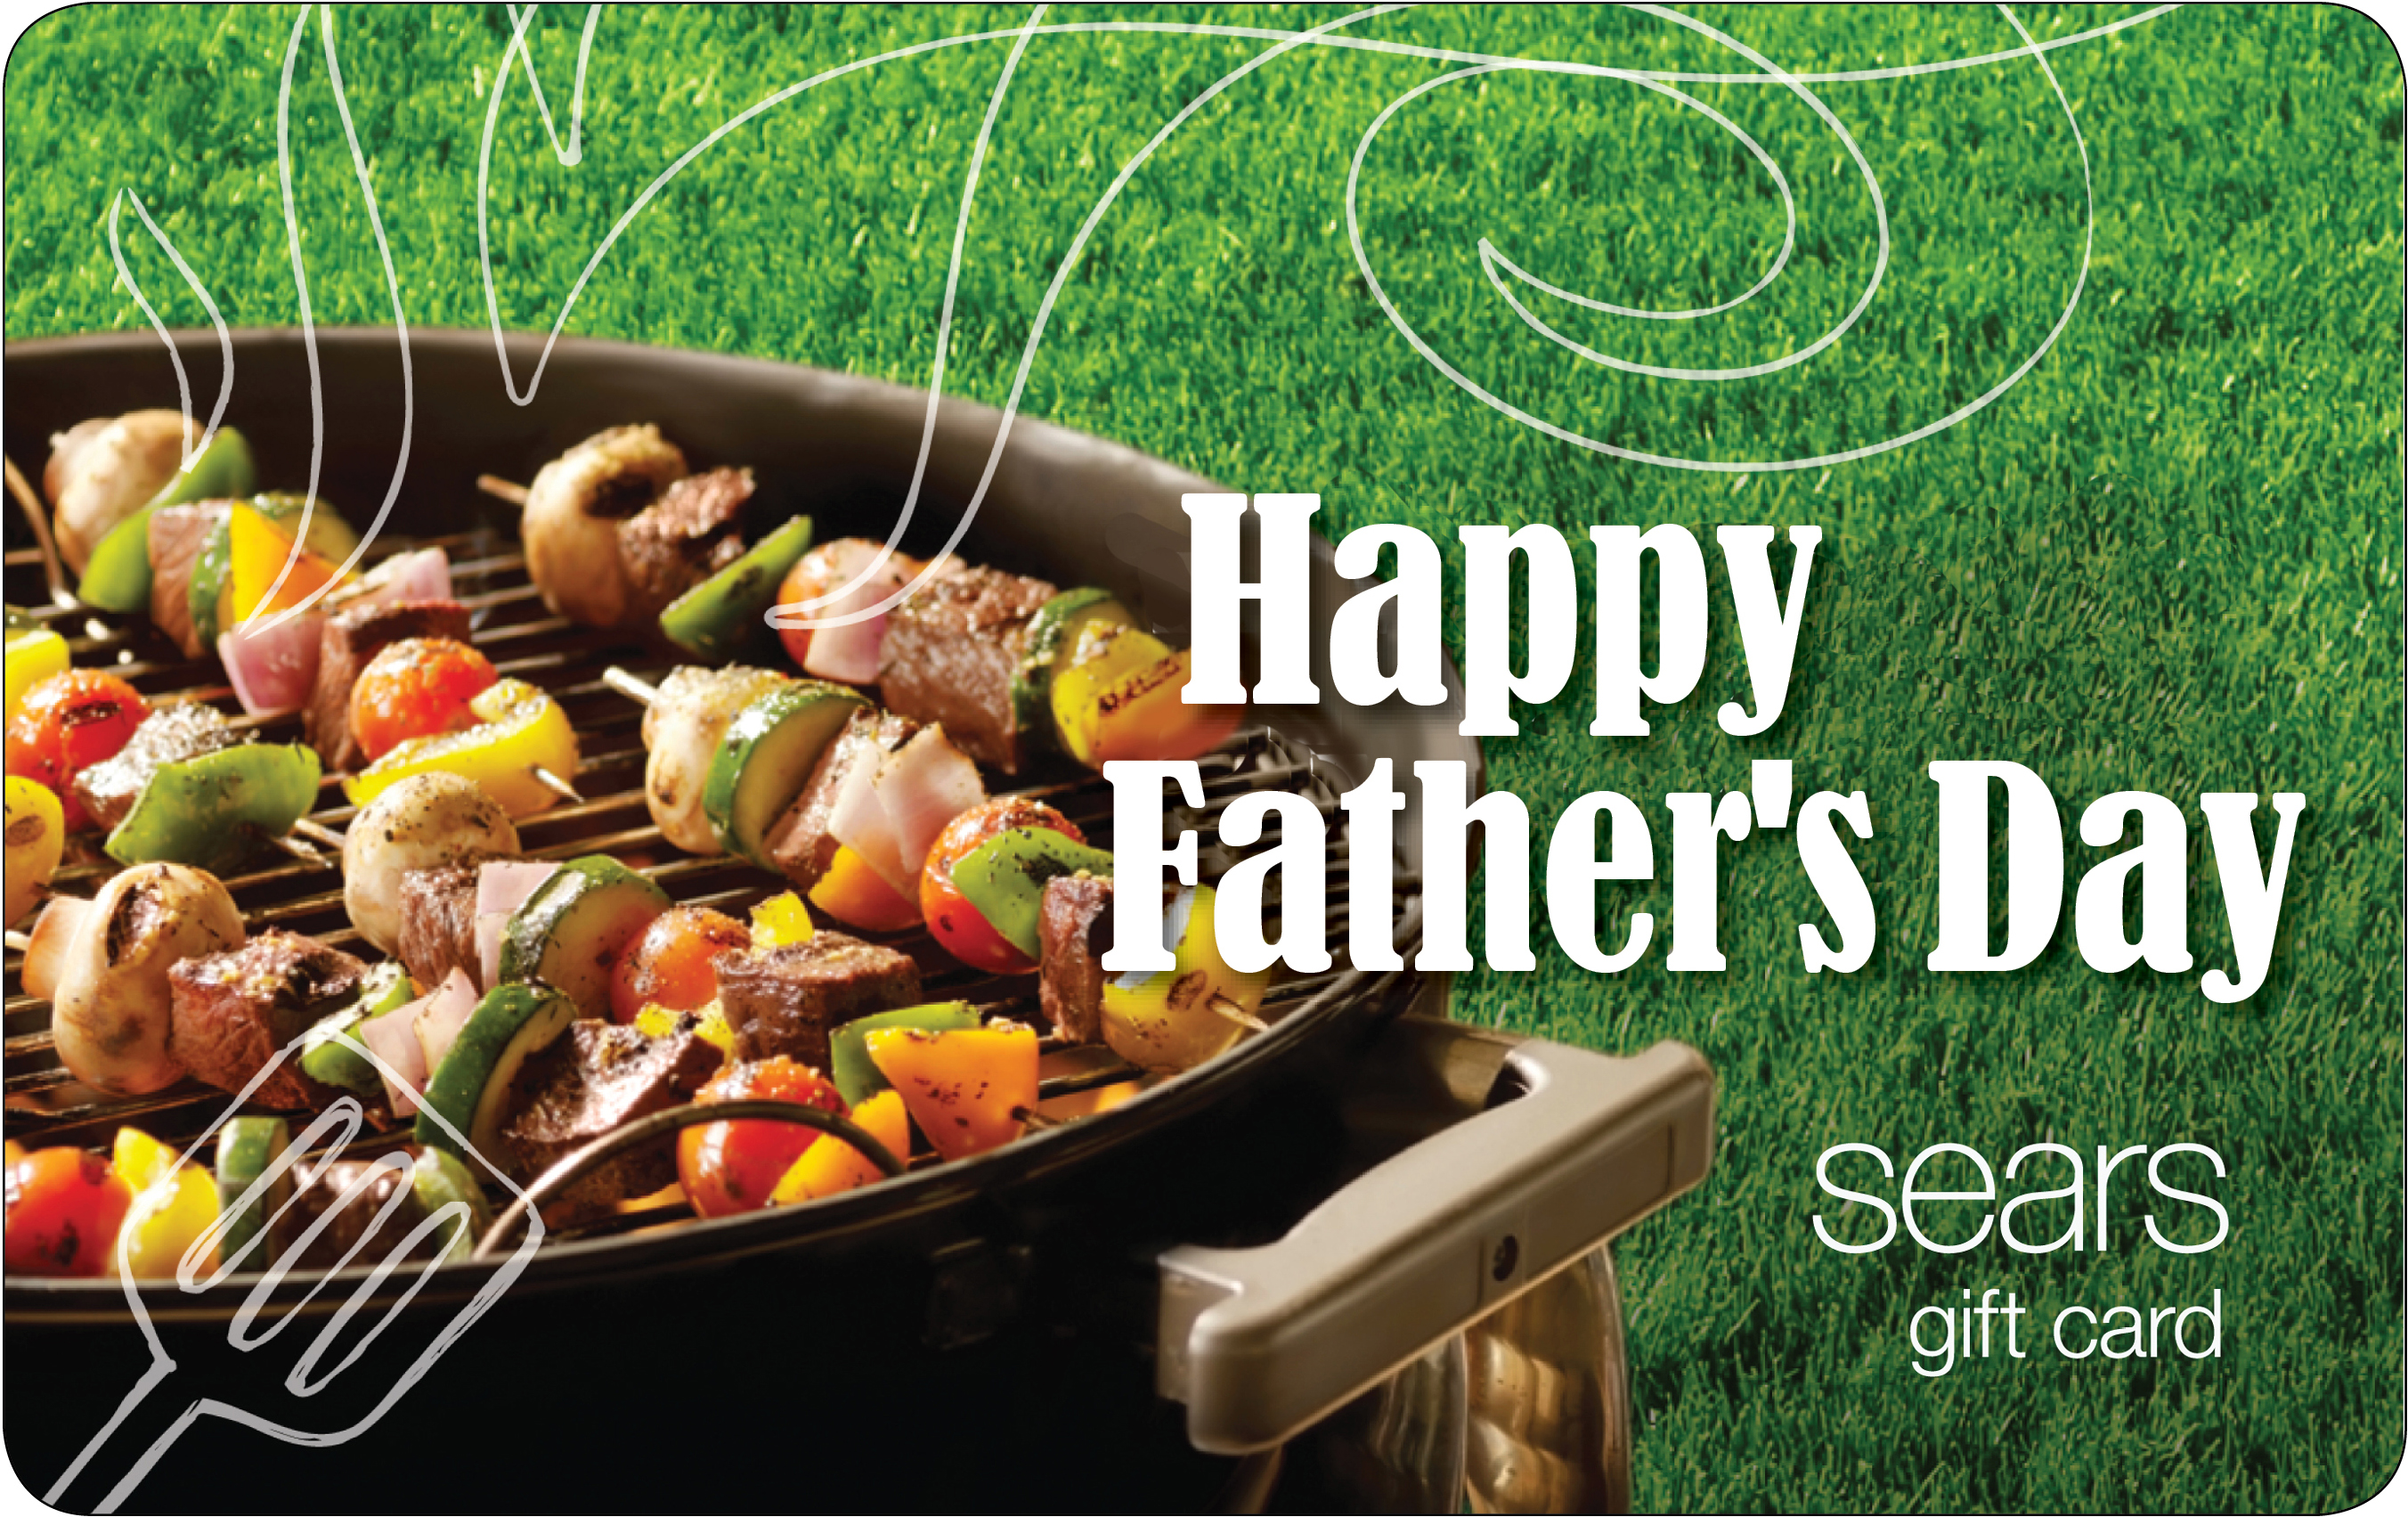 Sears Happy Father's Day eGift Card